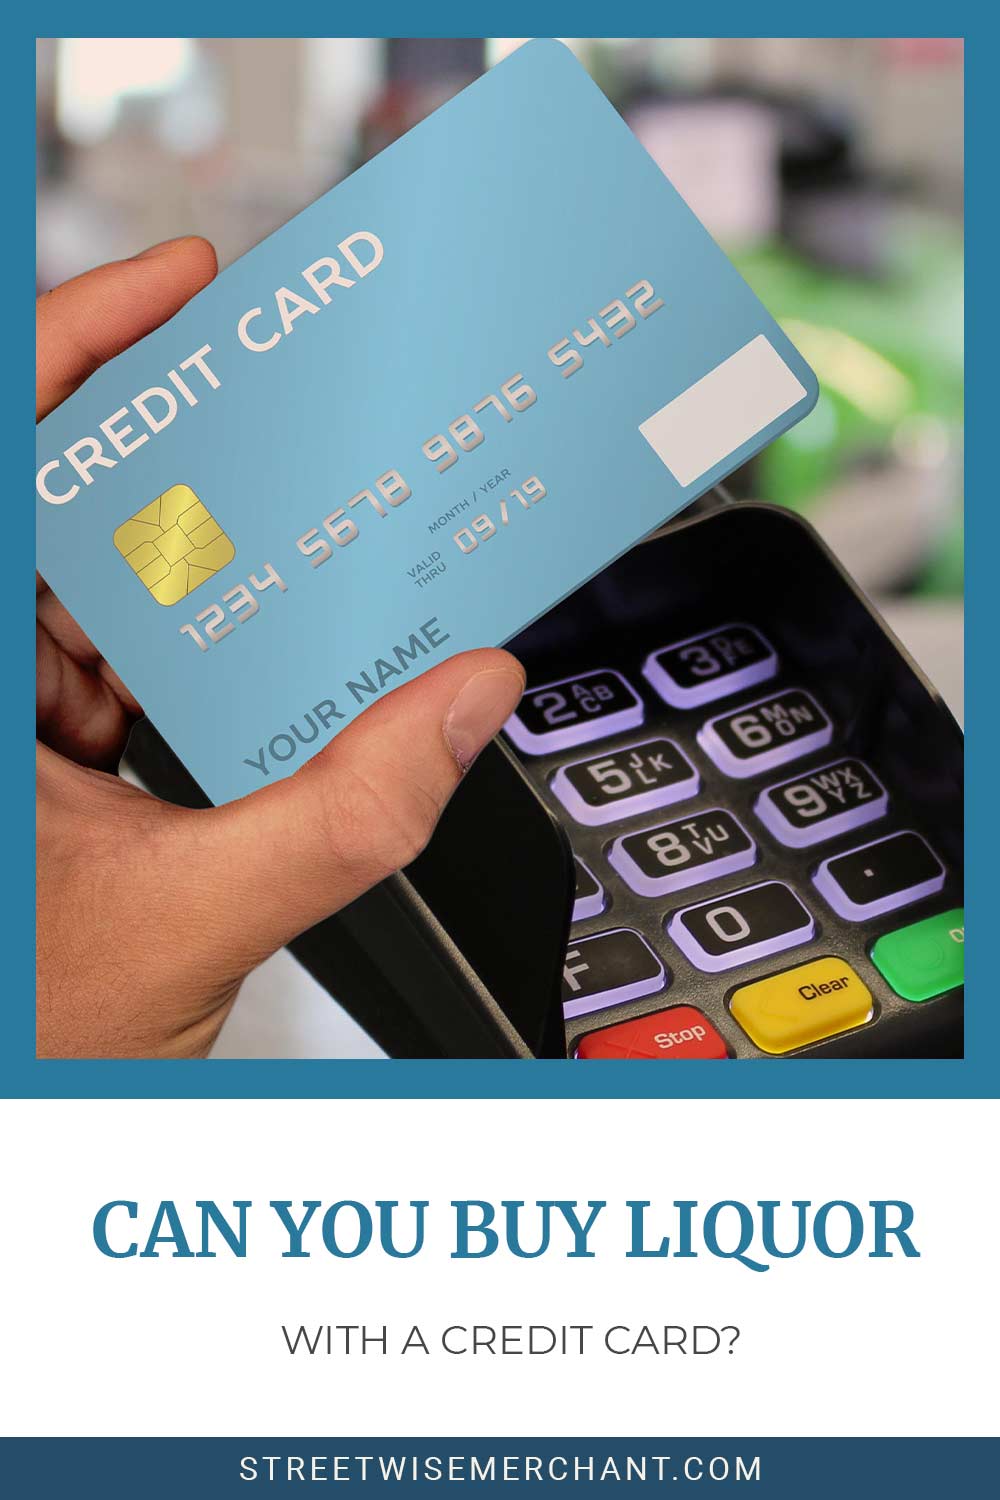 Credit card in front of a machine - Can You Buy Liquor With a Credit Card?